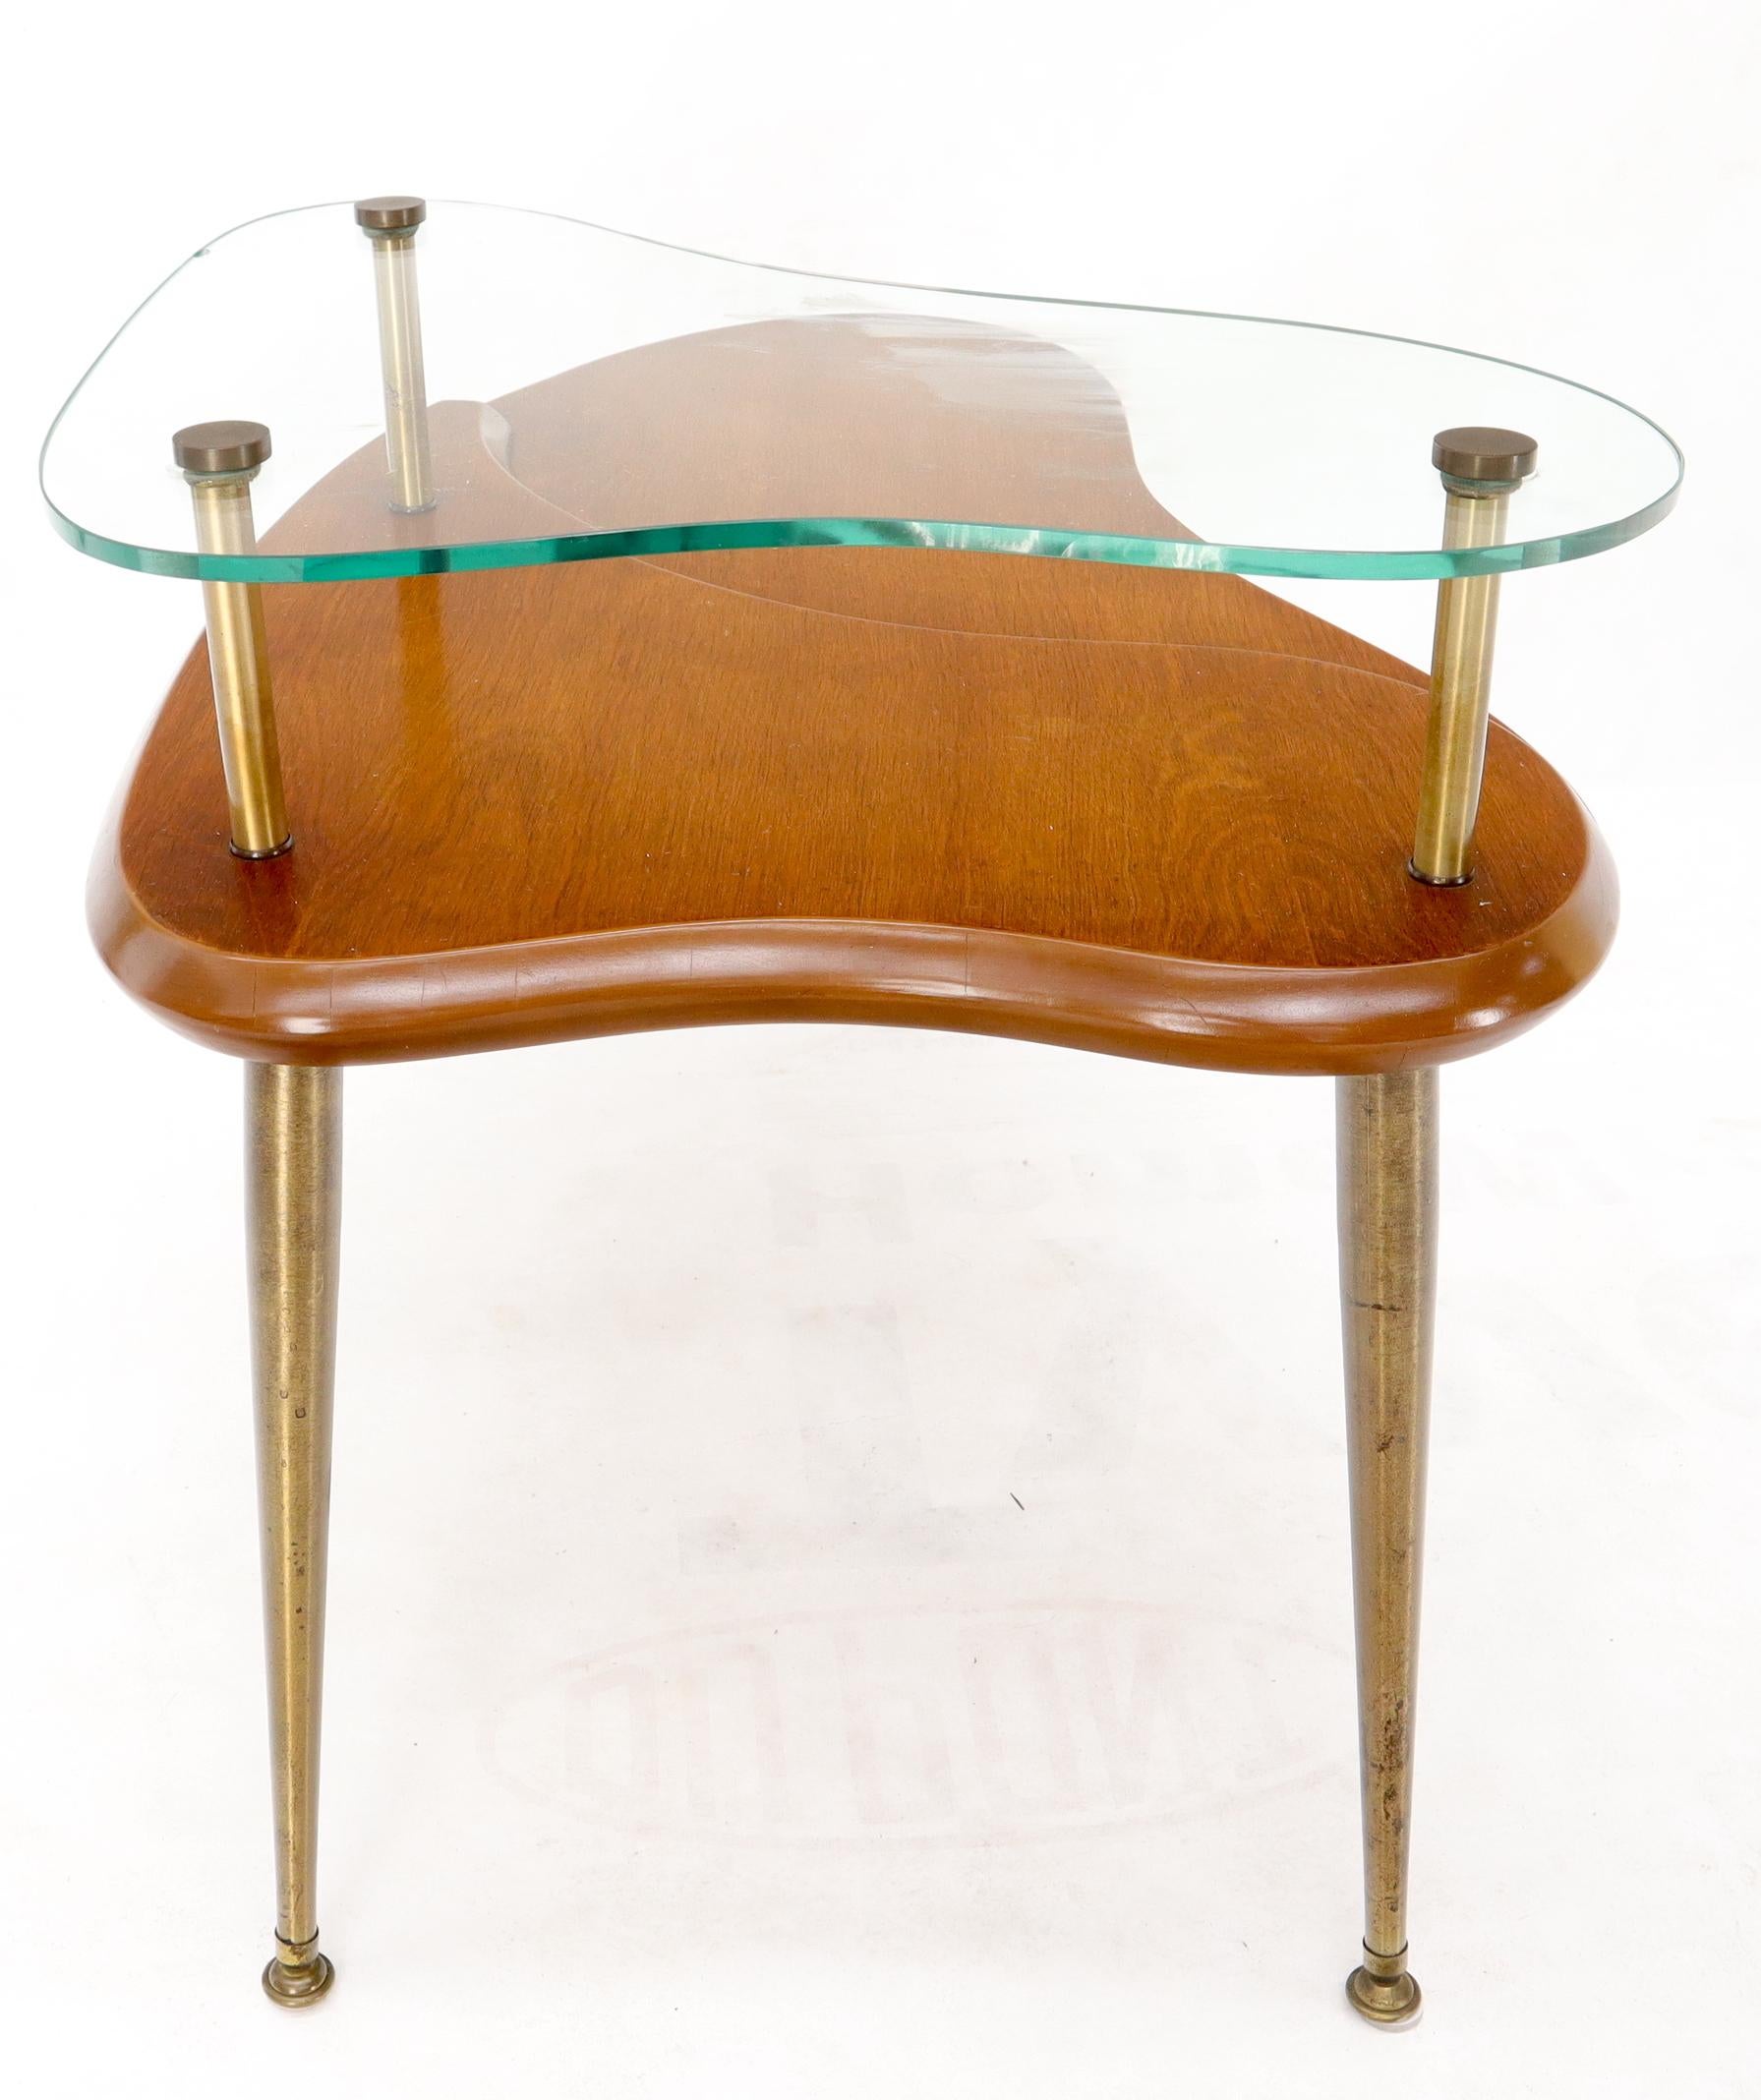 20th Century Kidney Comma Shape Two Tier Glass Walnut & Brass Conical Leg Coffee Side Table For Sale